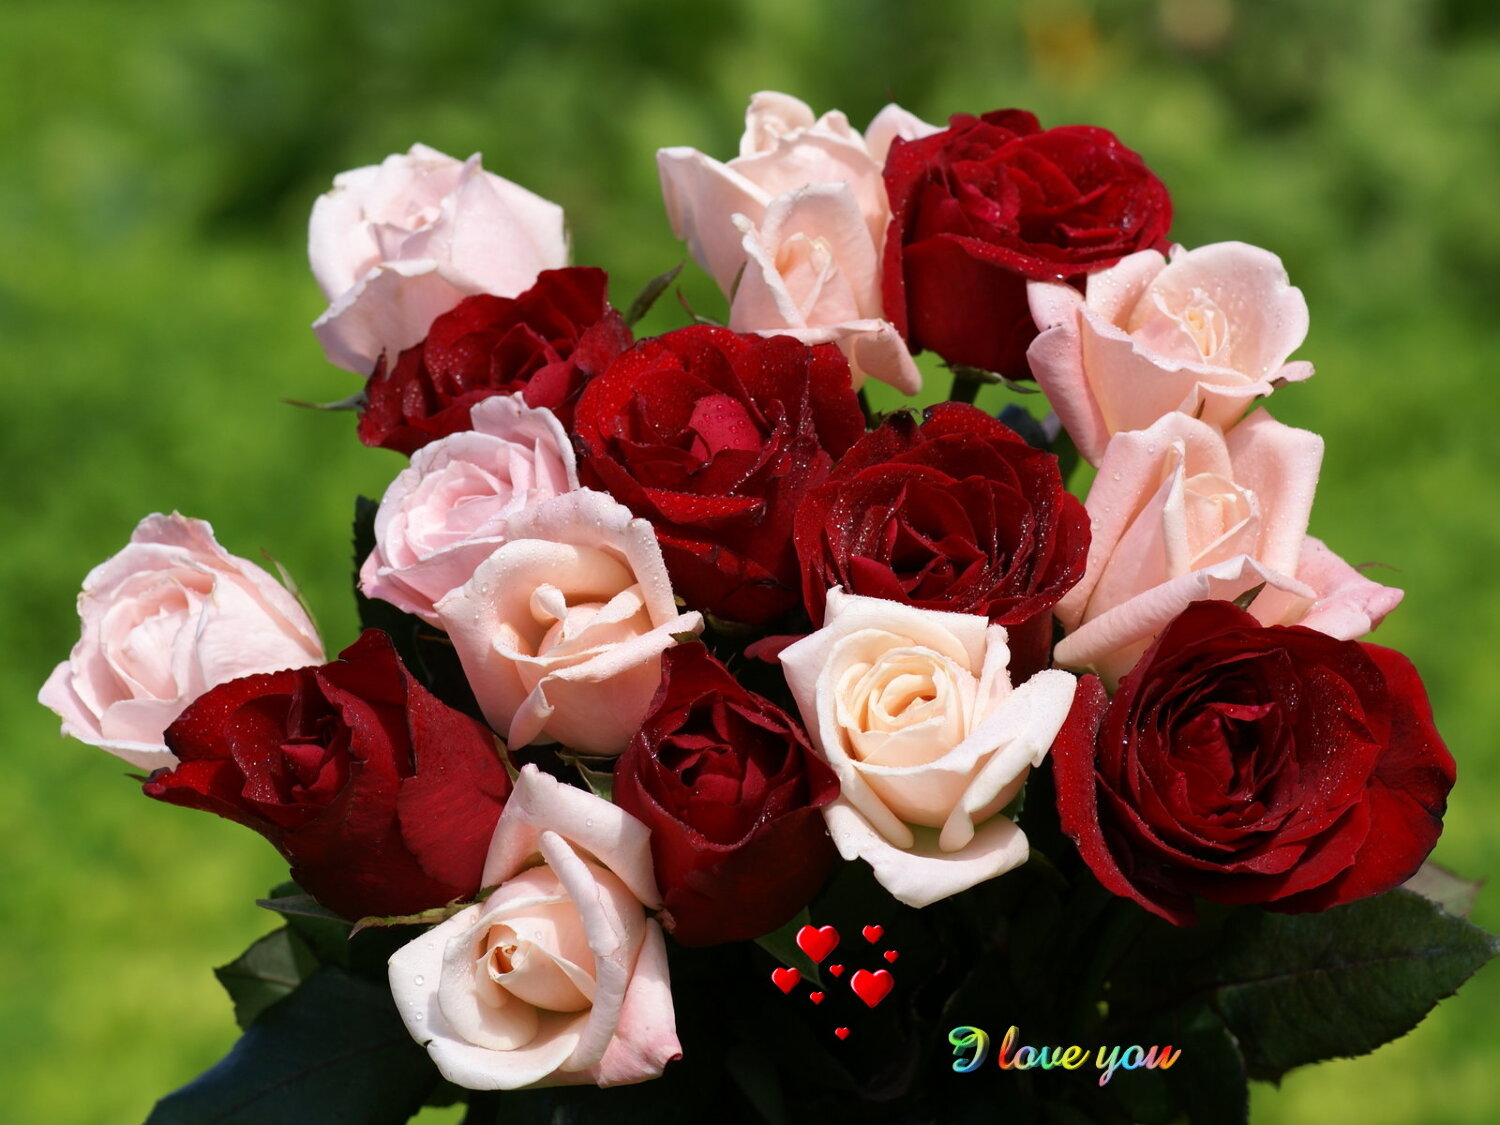 red roses buke 09 : flowers and natures on Rediff Pages